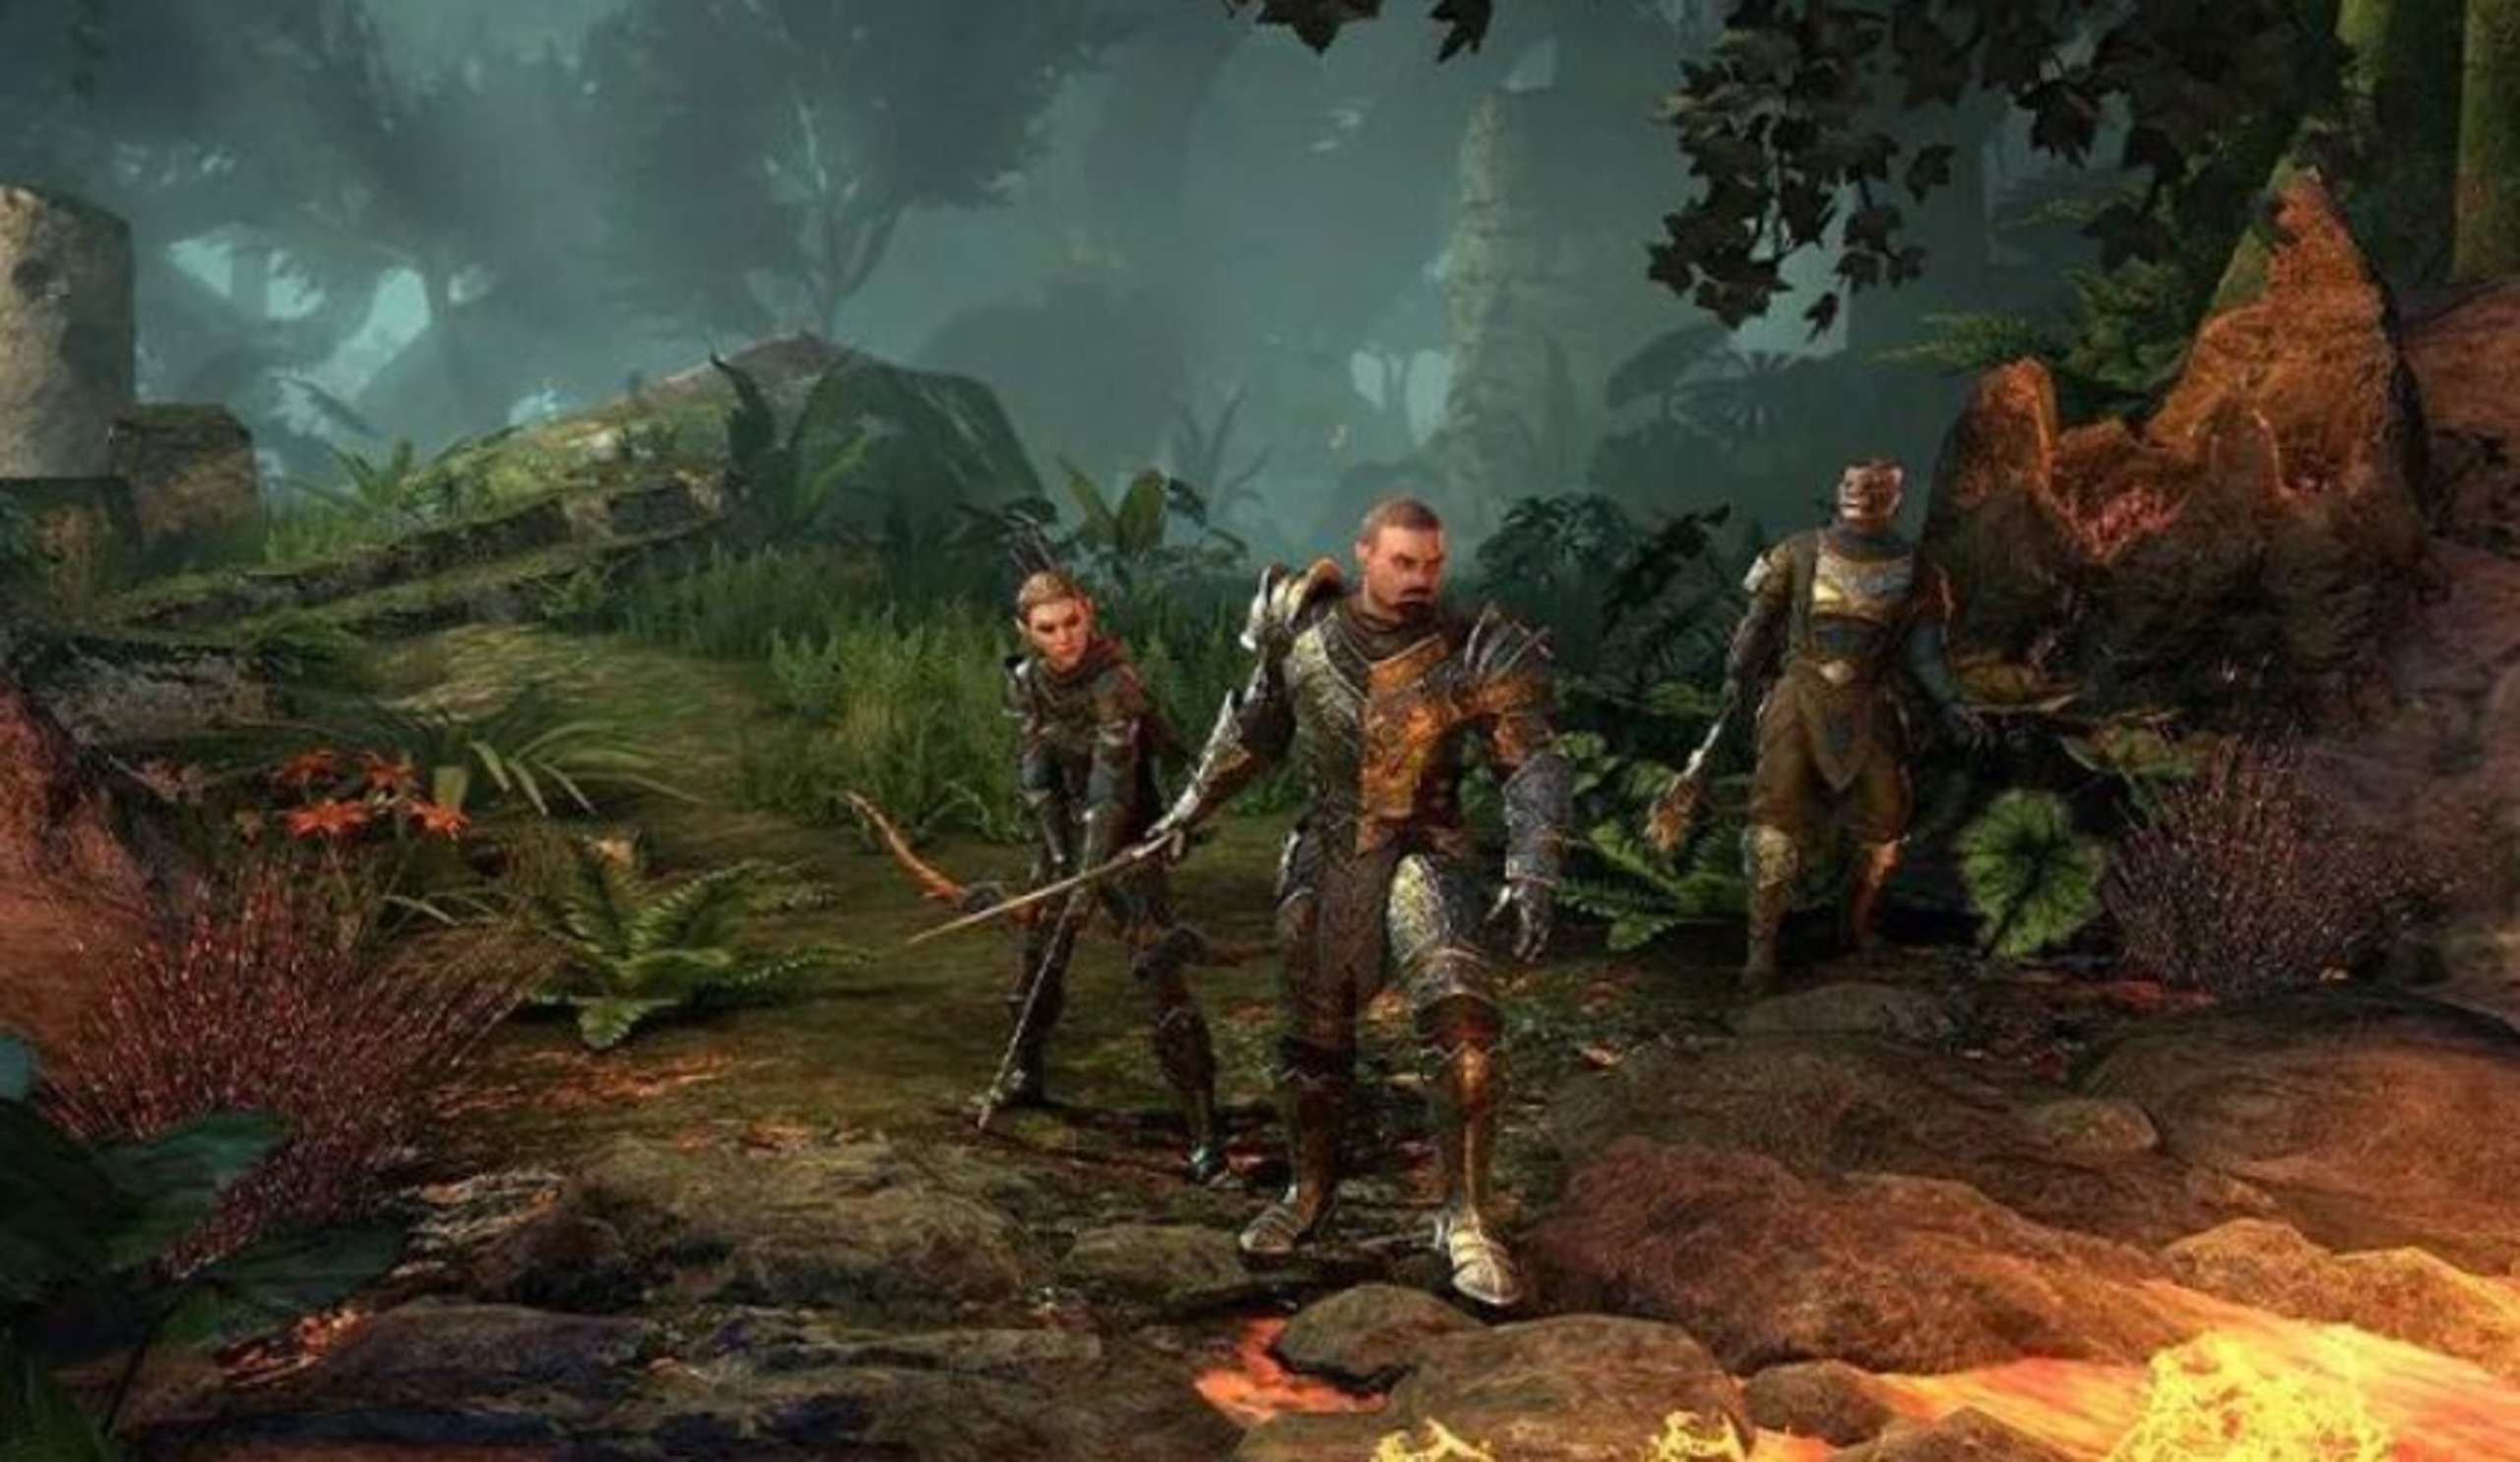 Firesong, The Final Downloadable Content Pack In The Elder Scrolls Online’s Legacy Of Bretons Tale, Has Revealed Its Duration